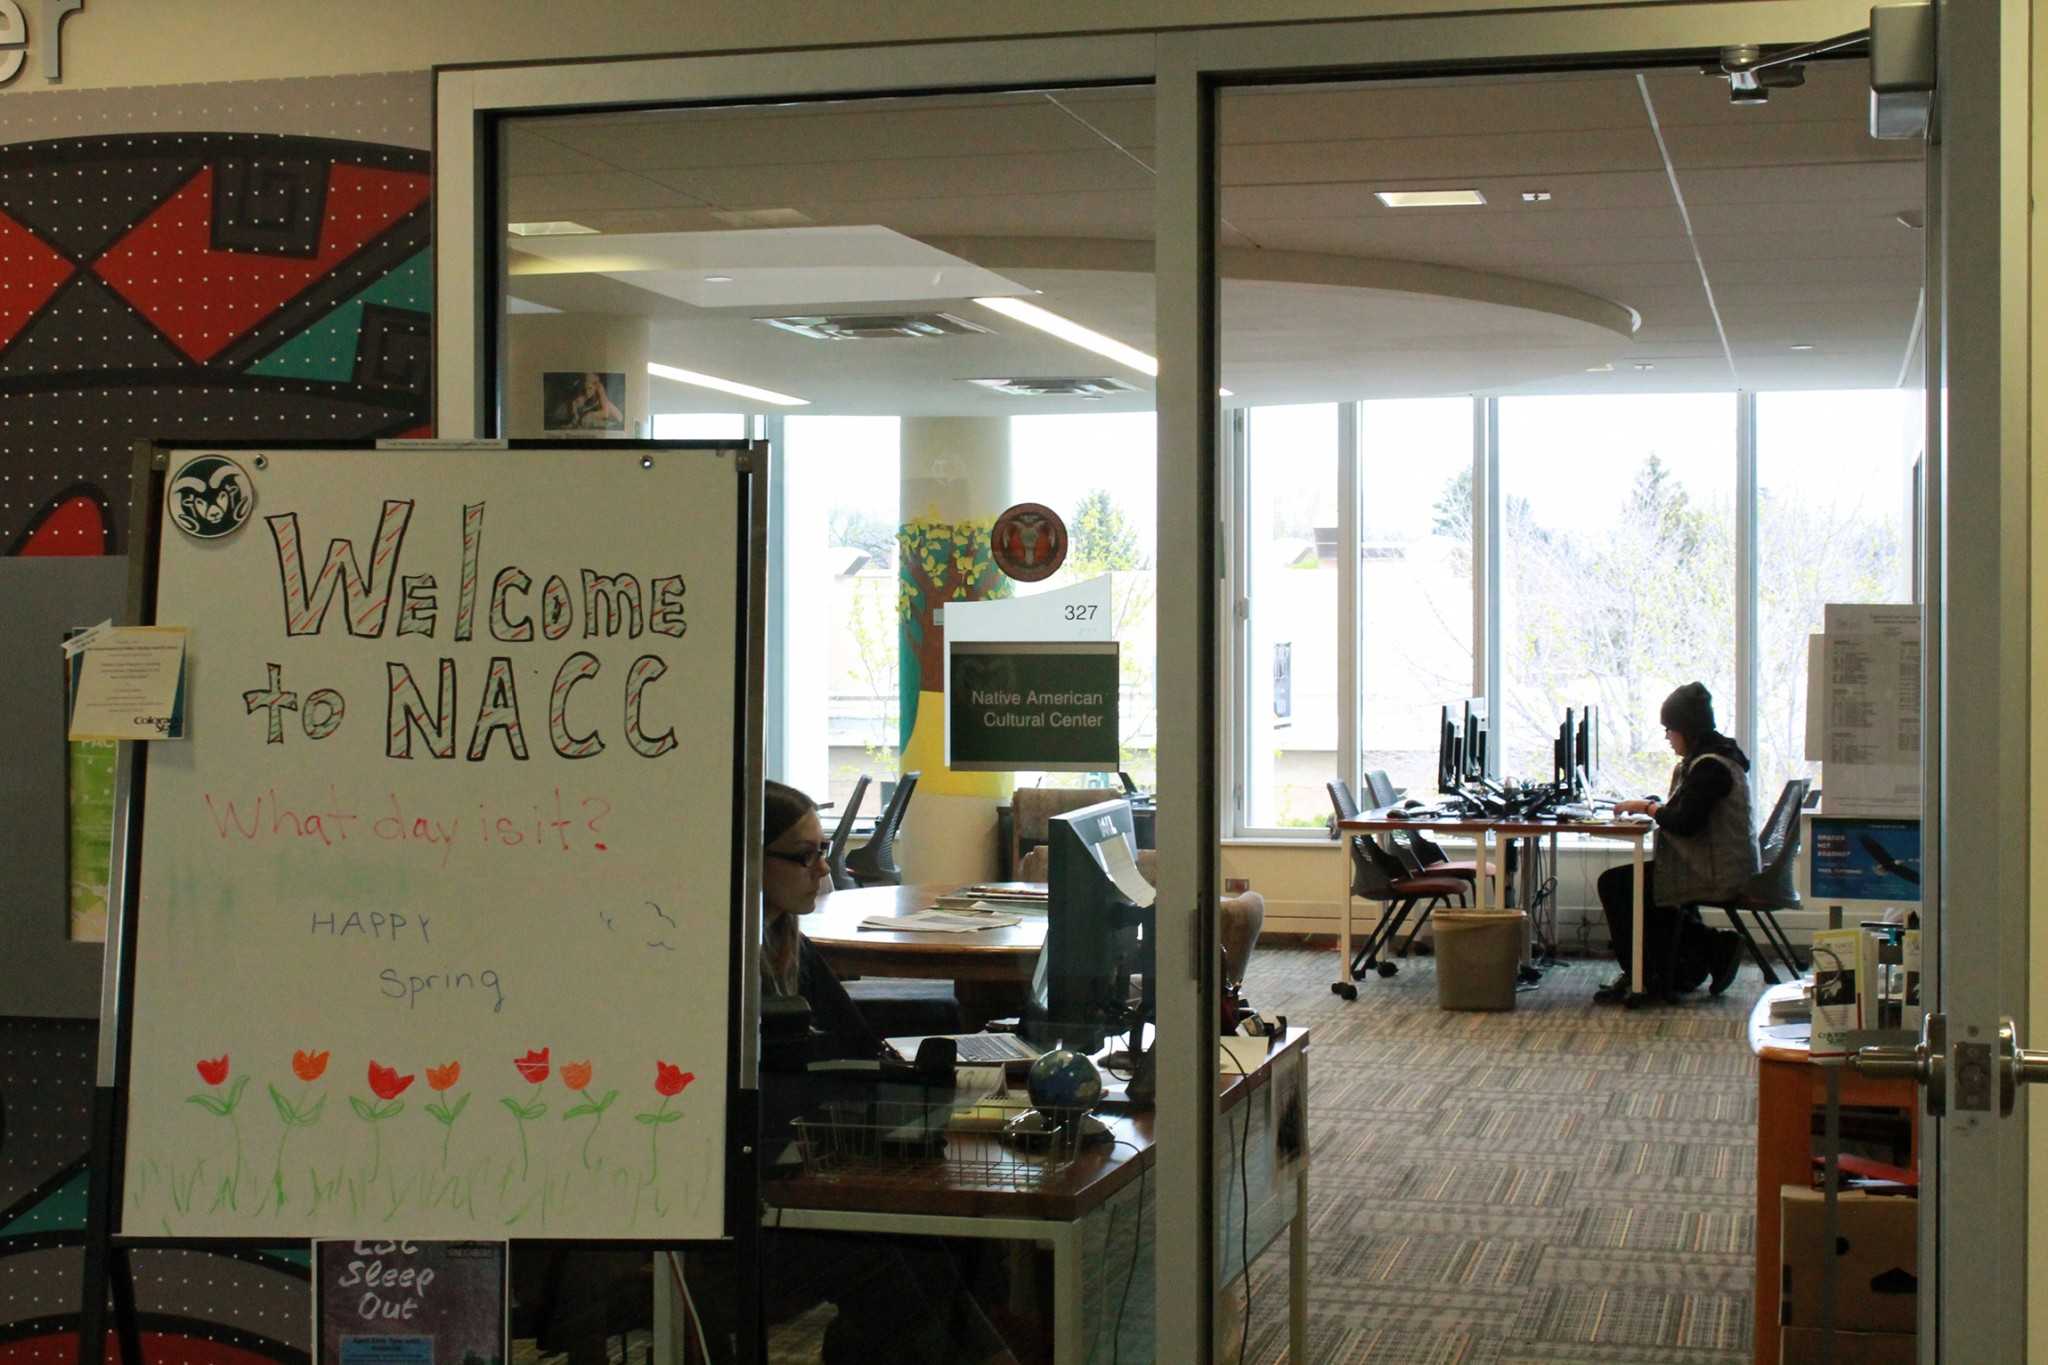 doorway and sign that reads "welcome to NACC"